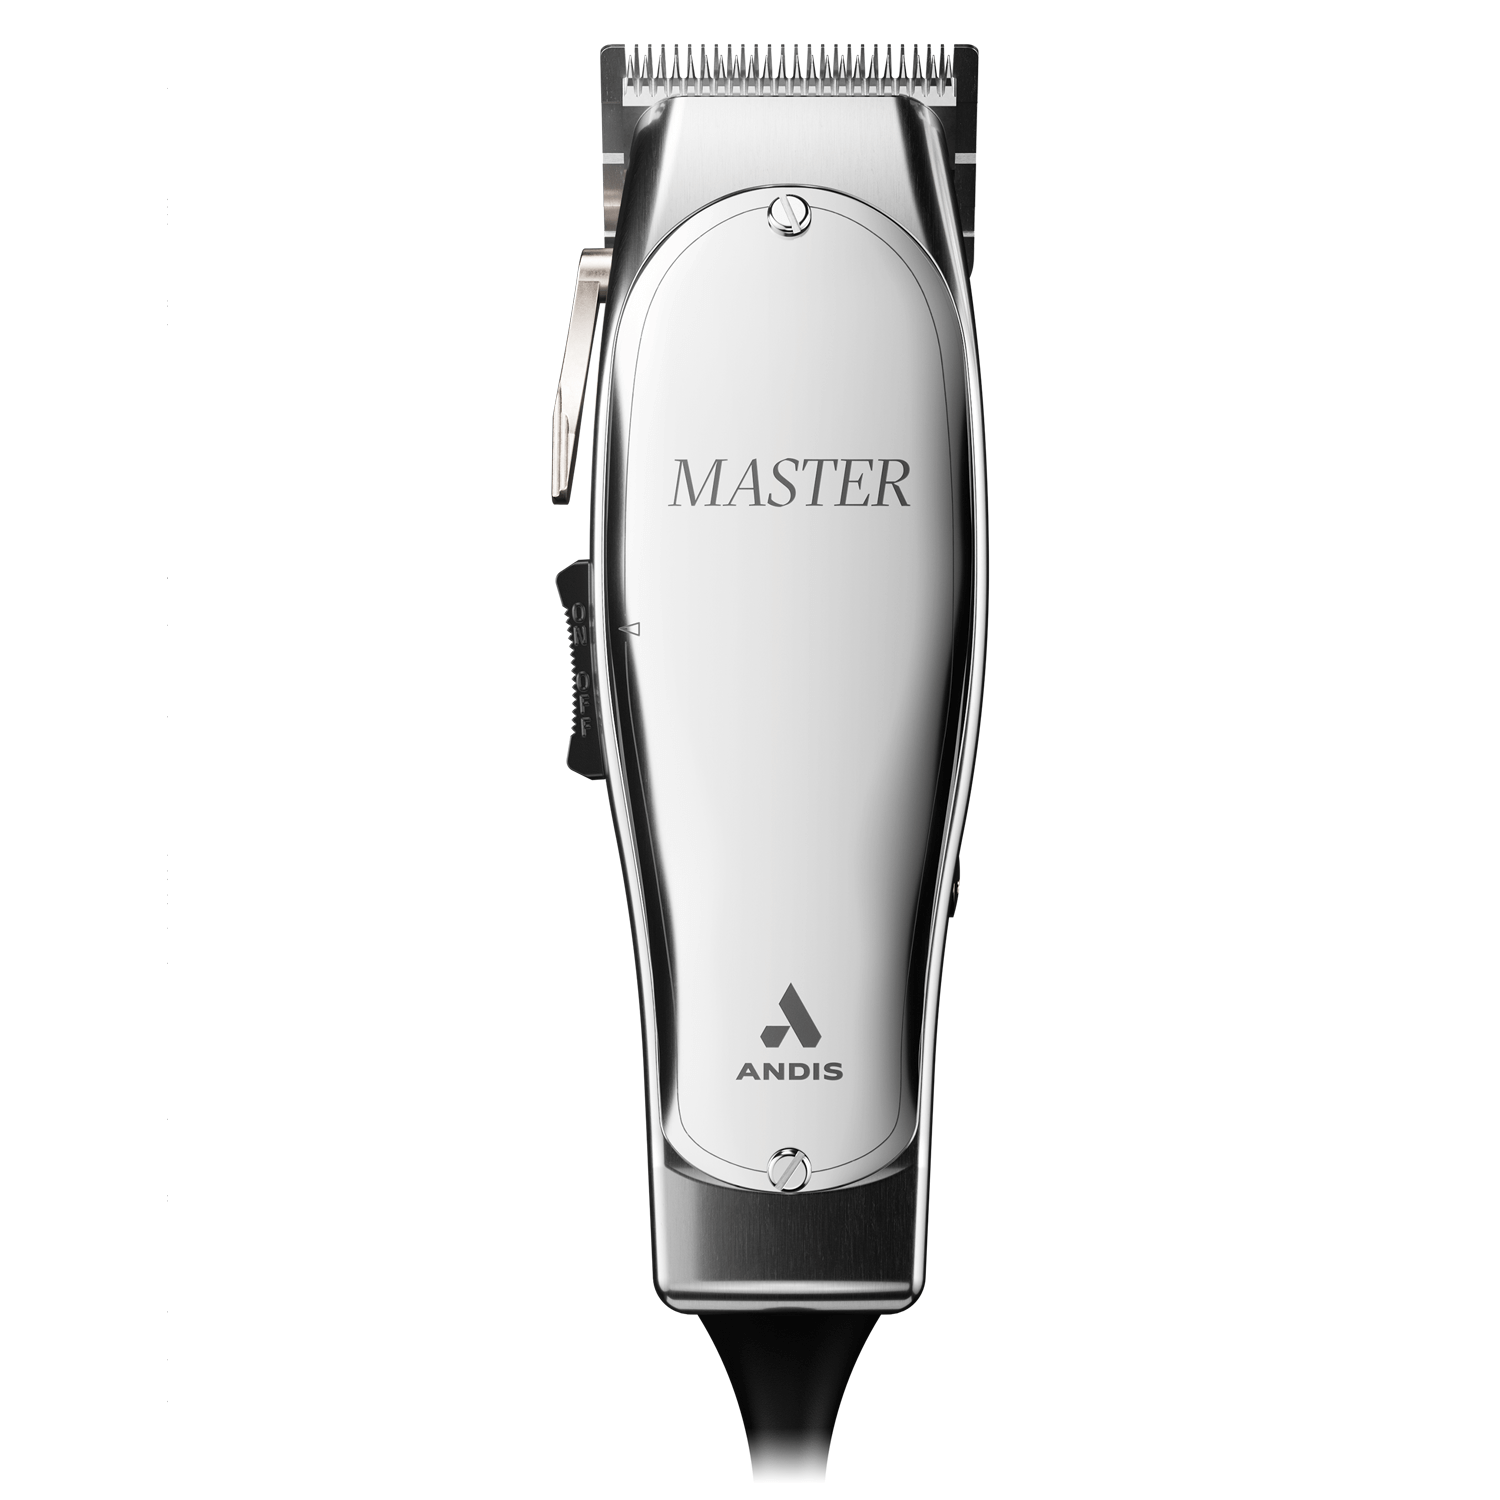 30 Andis Master Black Label Clippers